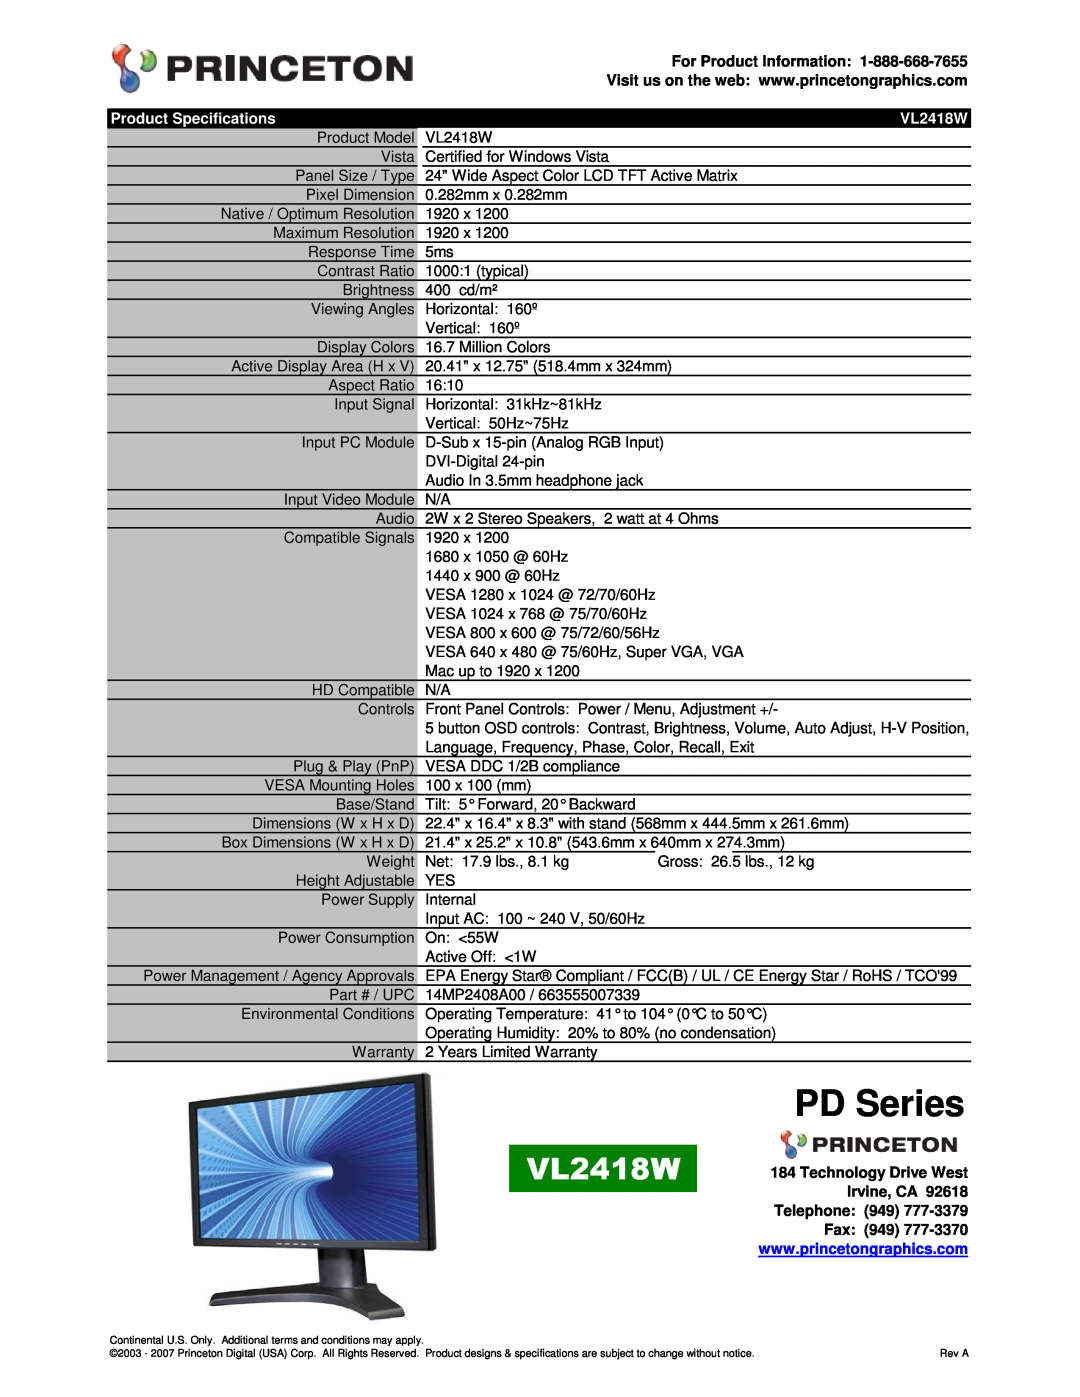 Princeton VL2418W specifications PD Series, For Product Information, Product Specifications 